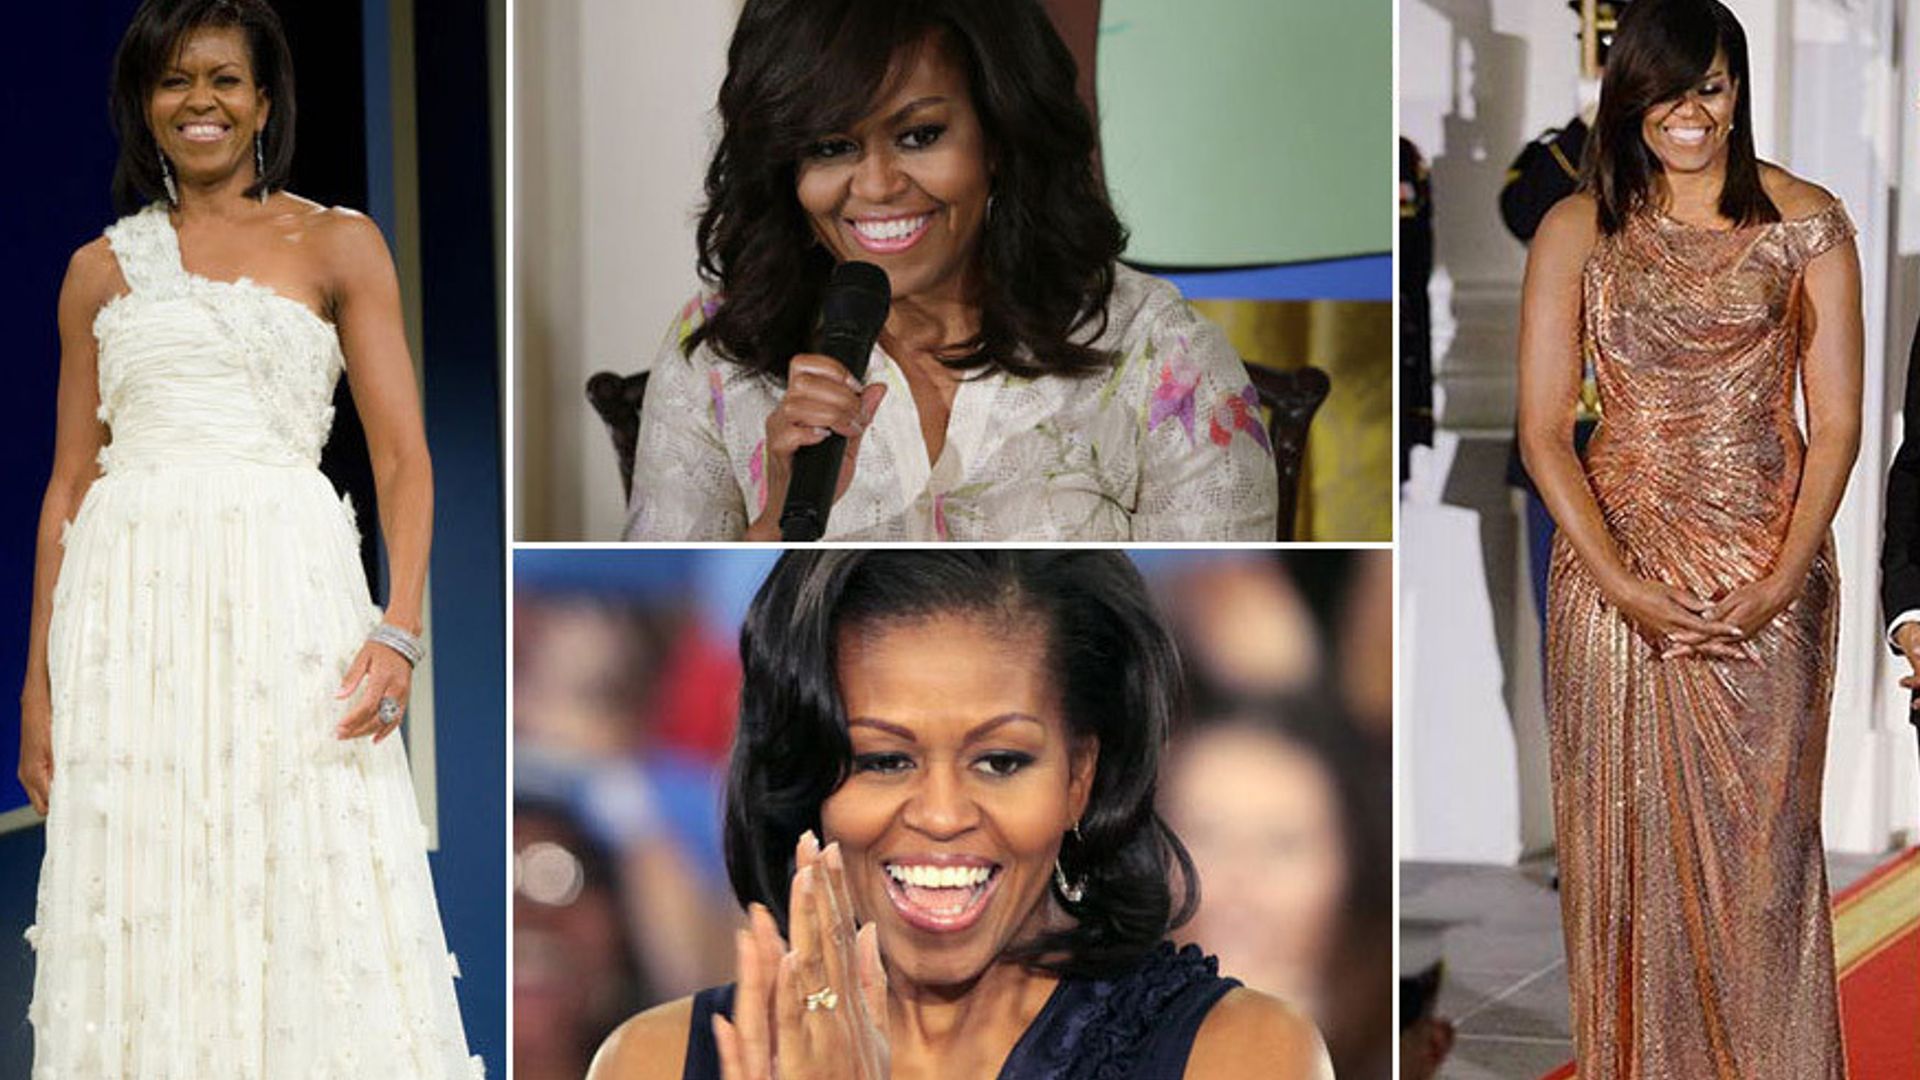 Michelle Obama's best looks while in the White House